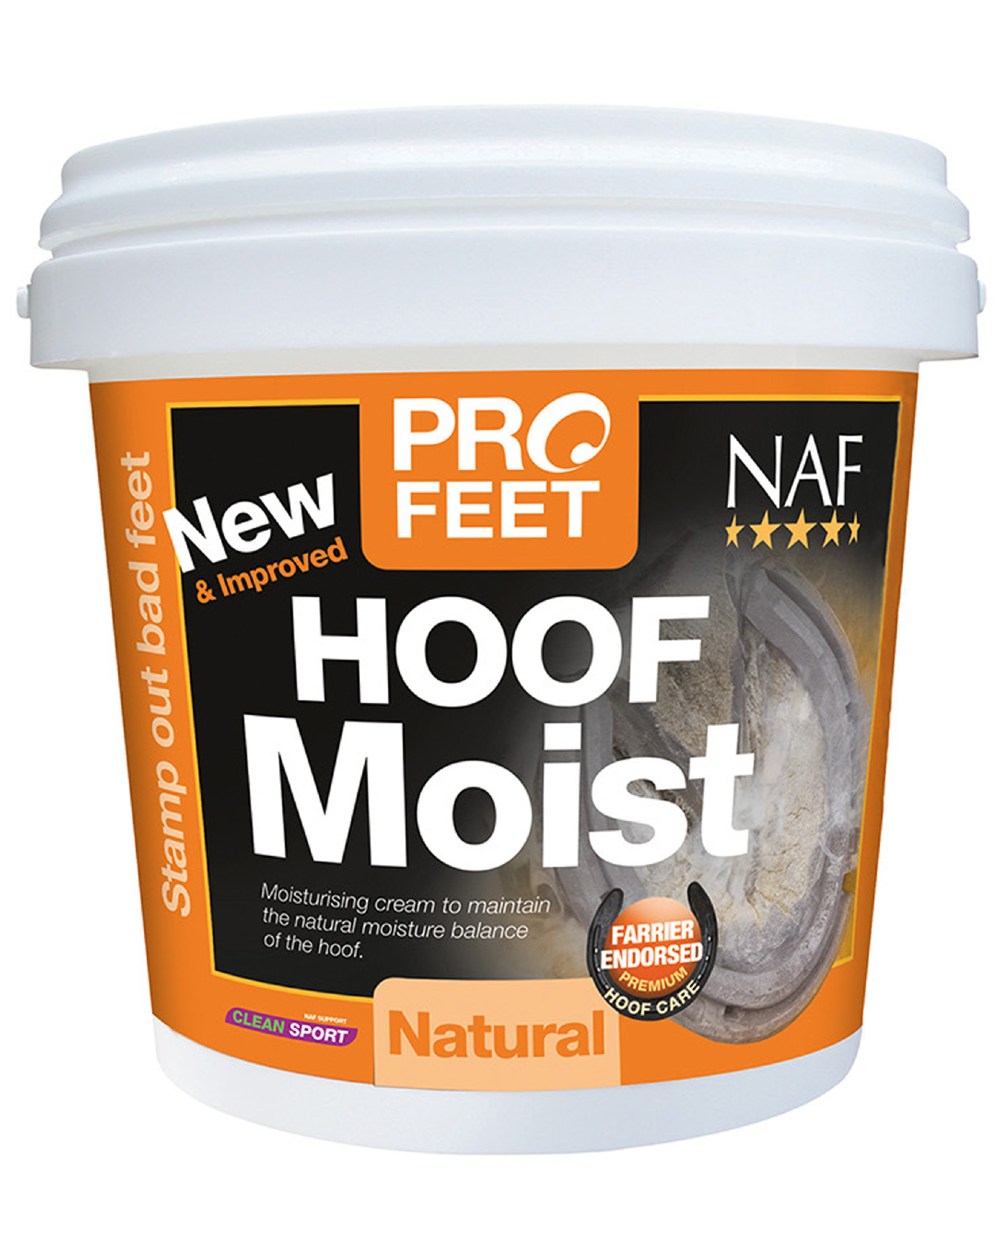 Natural coloured NAF Five Star Profeet Hoof Moist on white background 